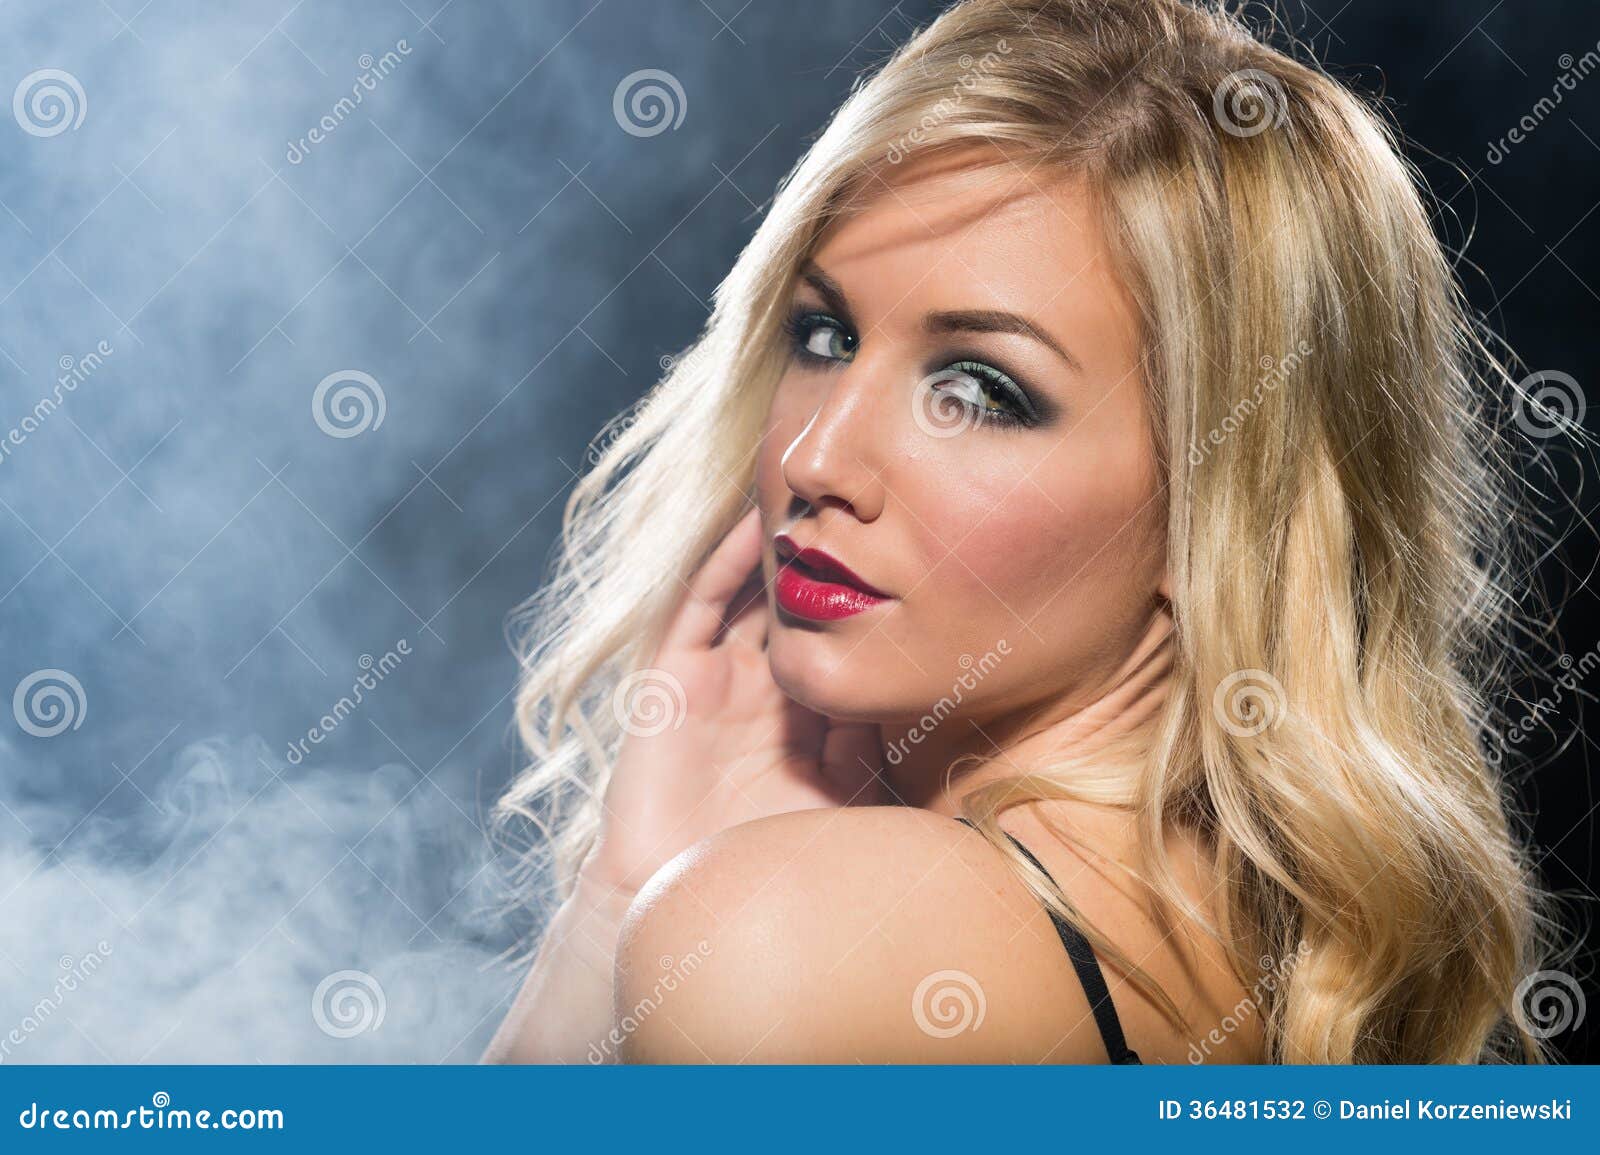 Blonde woman with long hair looking over her shoulder - wide 2